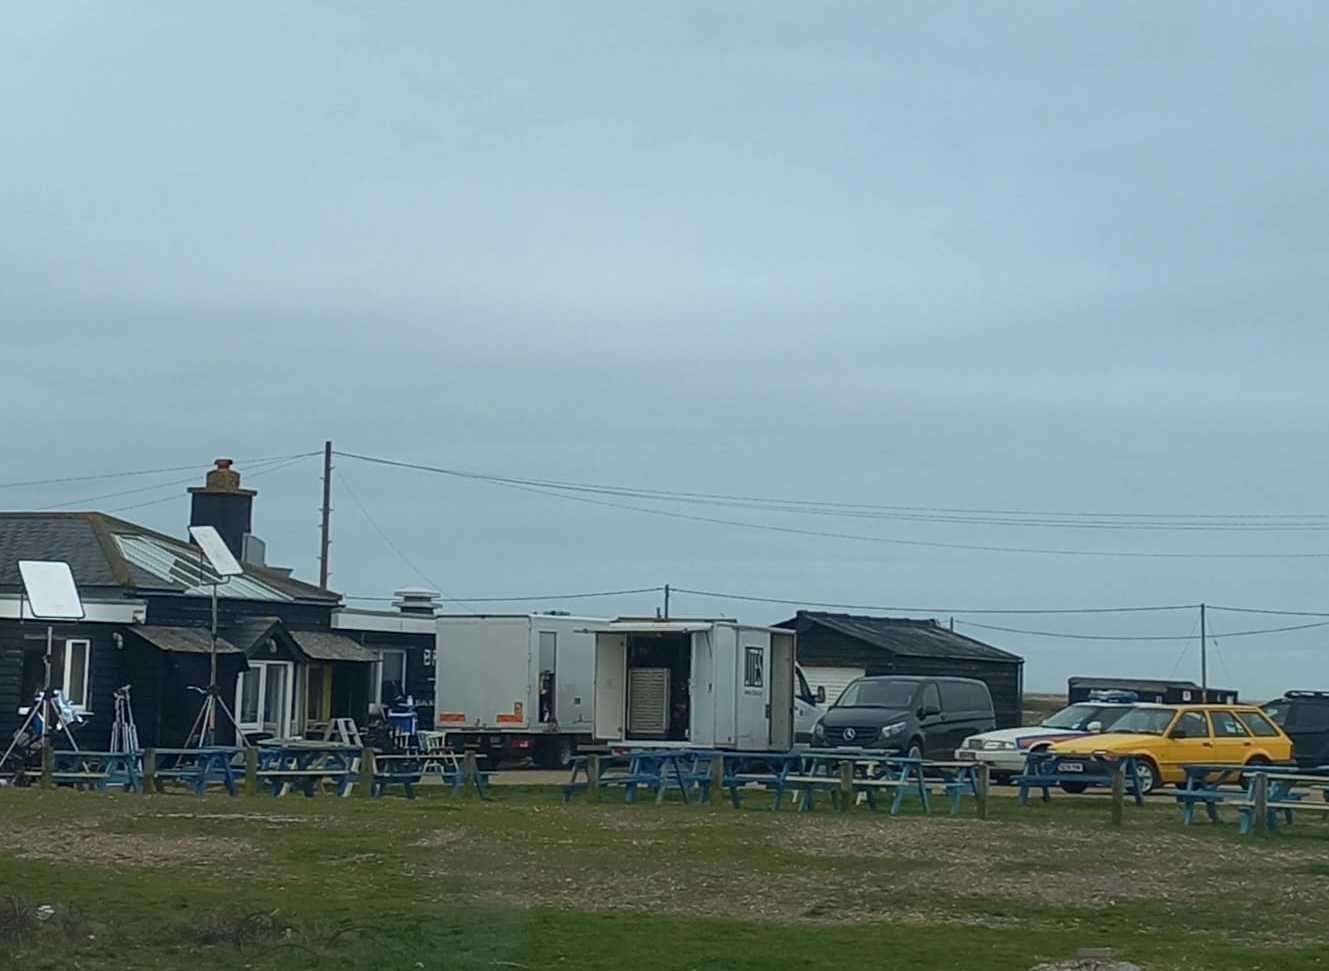 A cafe was reportedly hired out for the crew. Picture: Stella Howard Brown